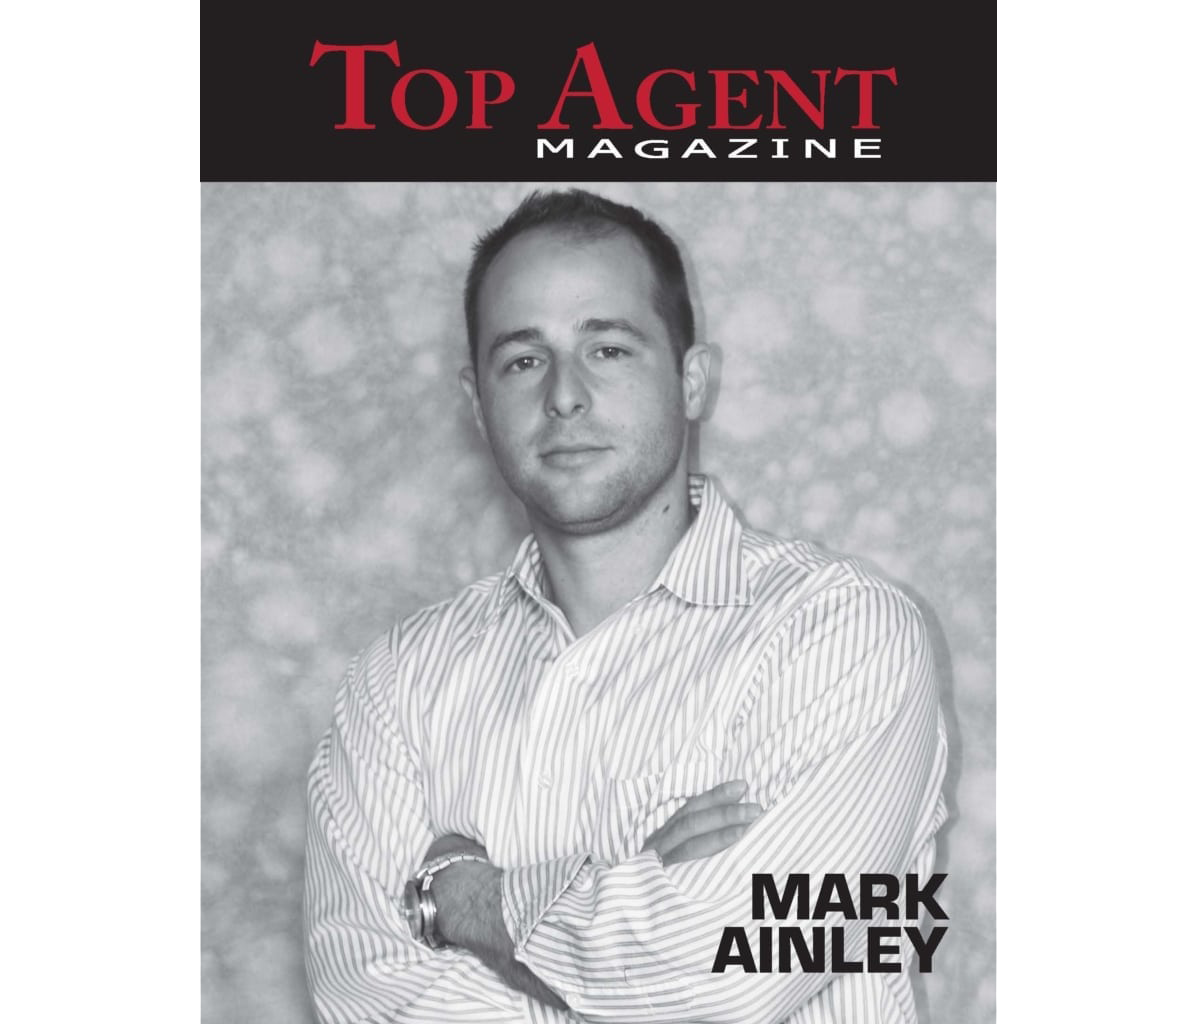 Top Agent Magazine - Chicago’s Responsive Property Manager